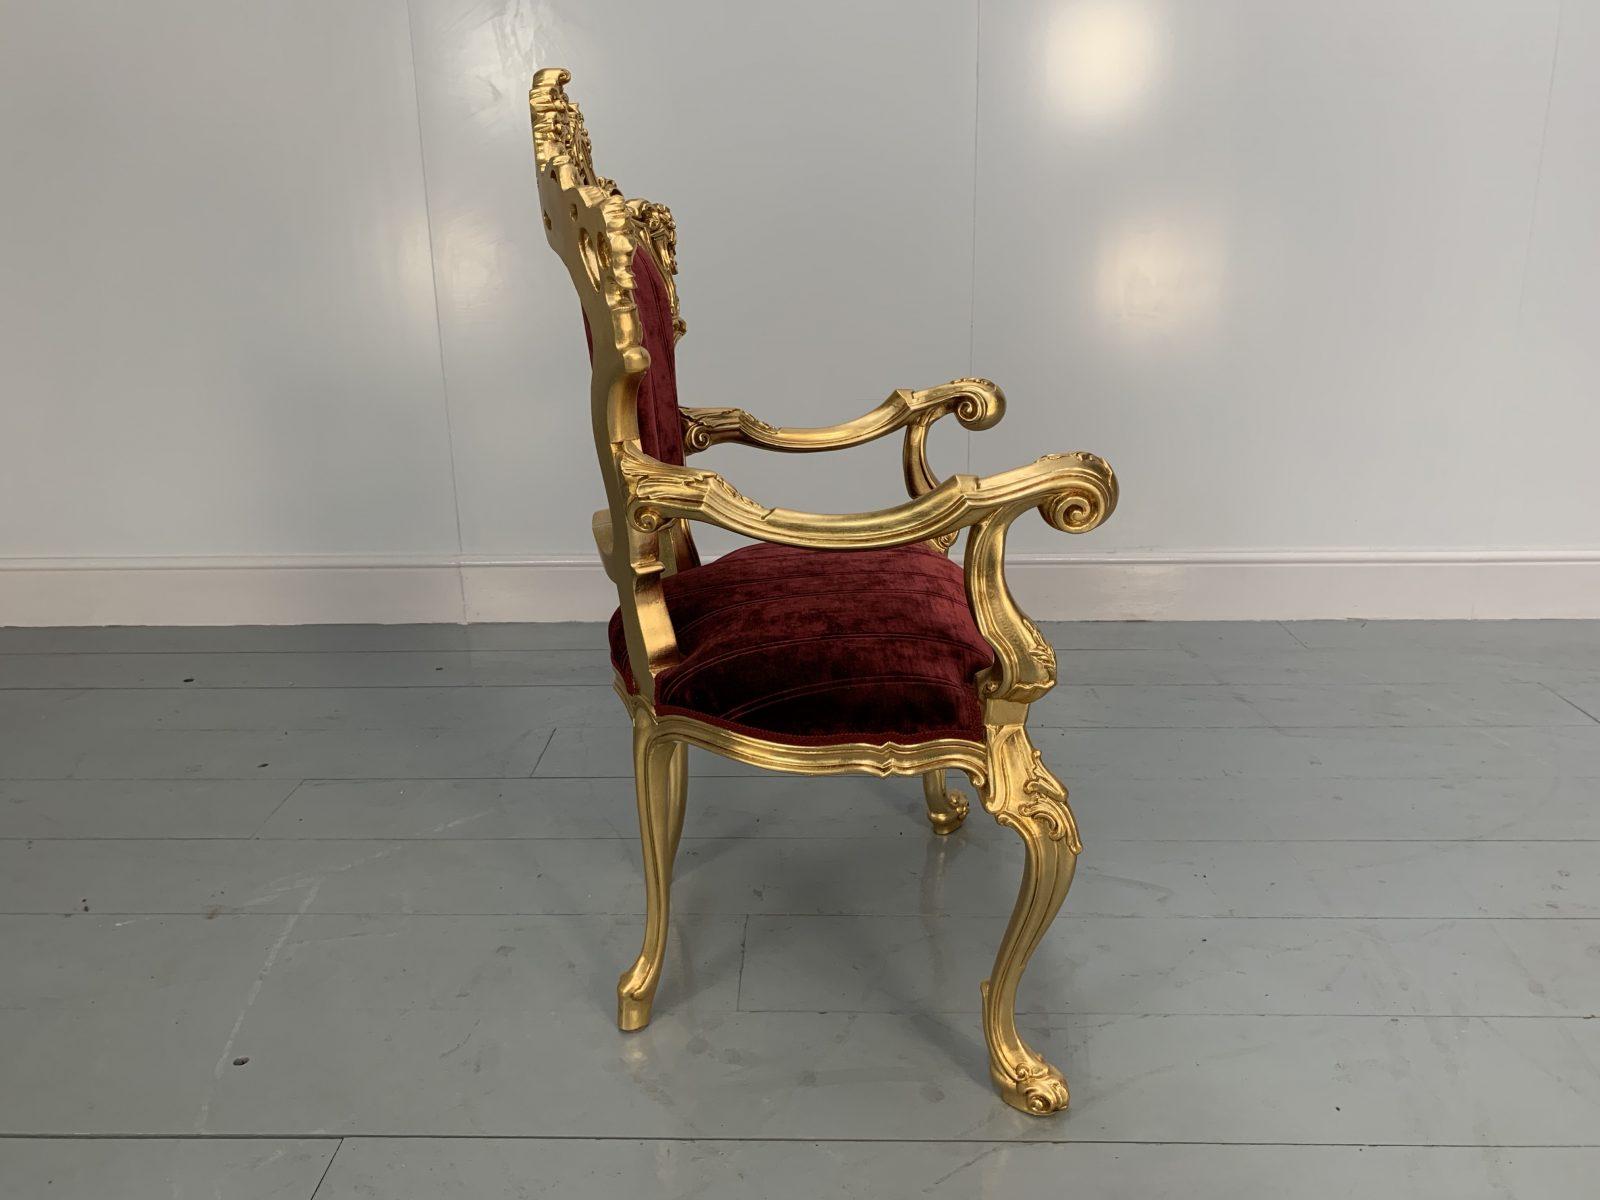 Pair of Asnaghi Fauteuil Baroque Rococo Armchairs in Crimson Velvet and Gilt In Good Condition For Sale In Barrowford, GB